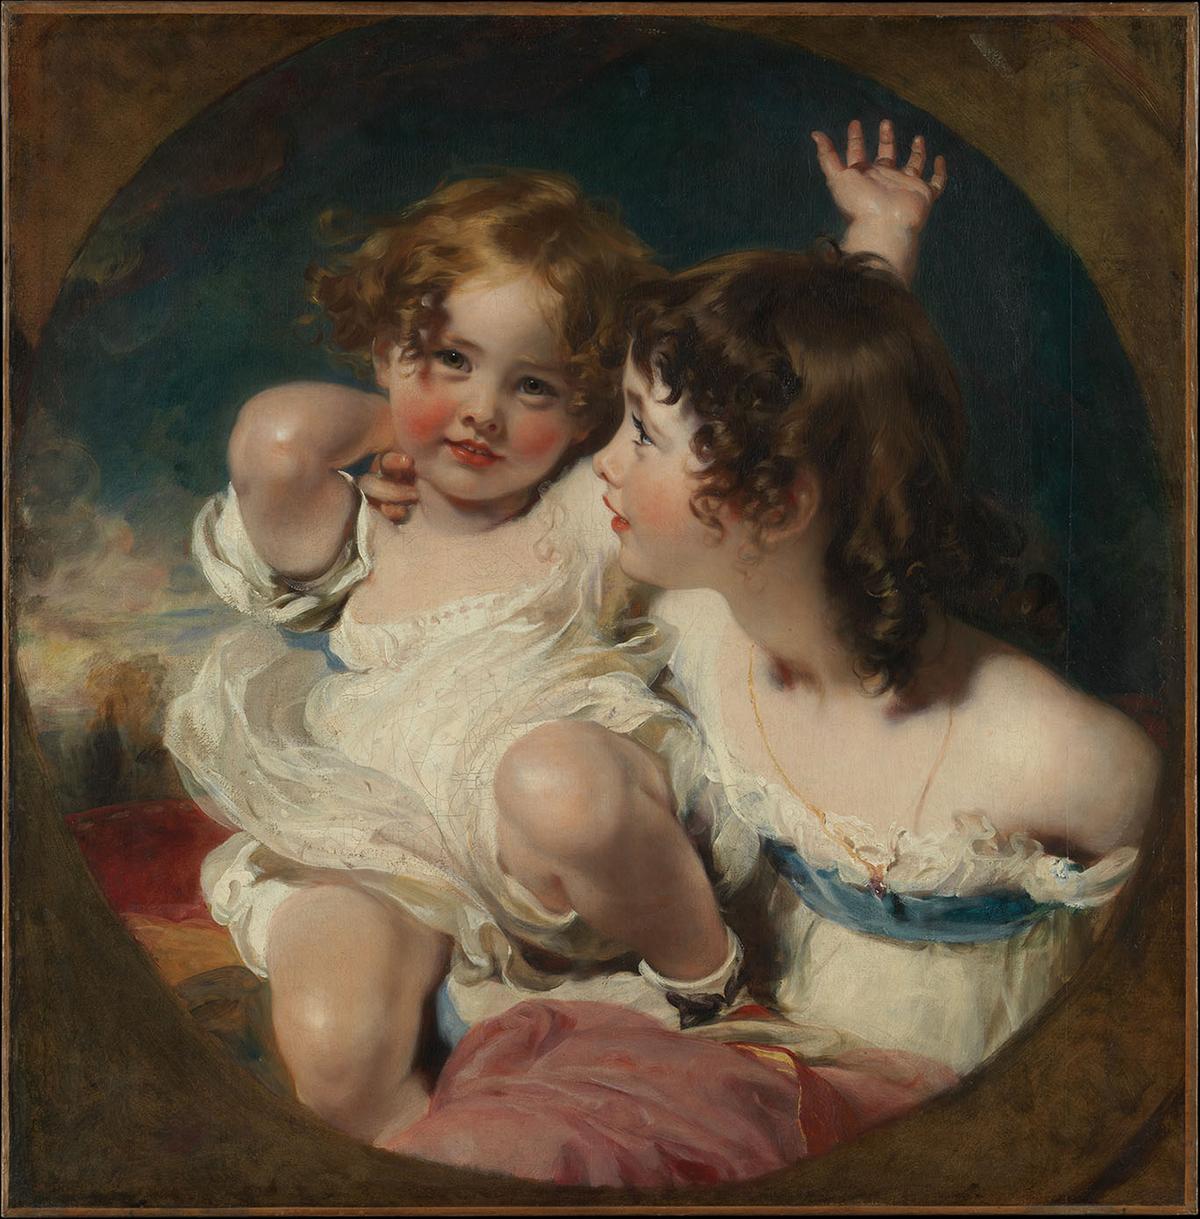 A portrait of two girls embodying the unabashed exuberance of childhood with the spark of enthusiasm in their eyes. "The Calmady Children," 1823, by Sir Thomas Lawrence. Oil on canvas. The Metropolitan Museum of Art, New York. (Public Domain)